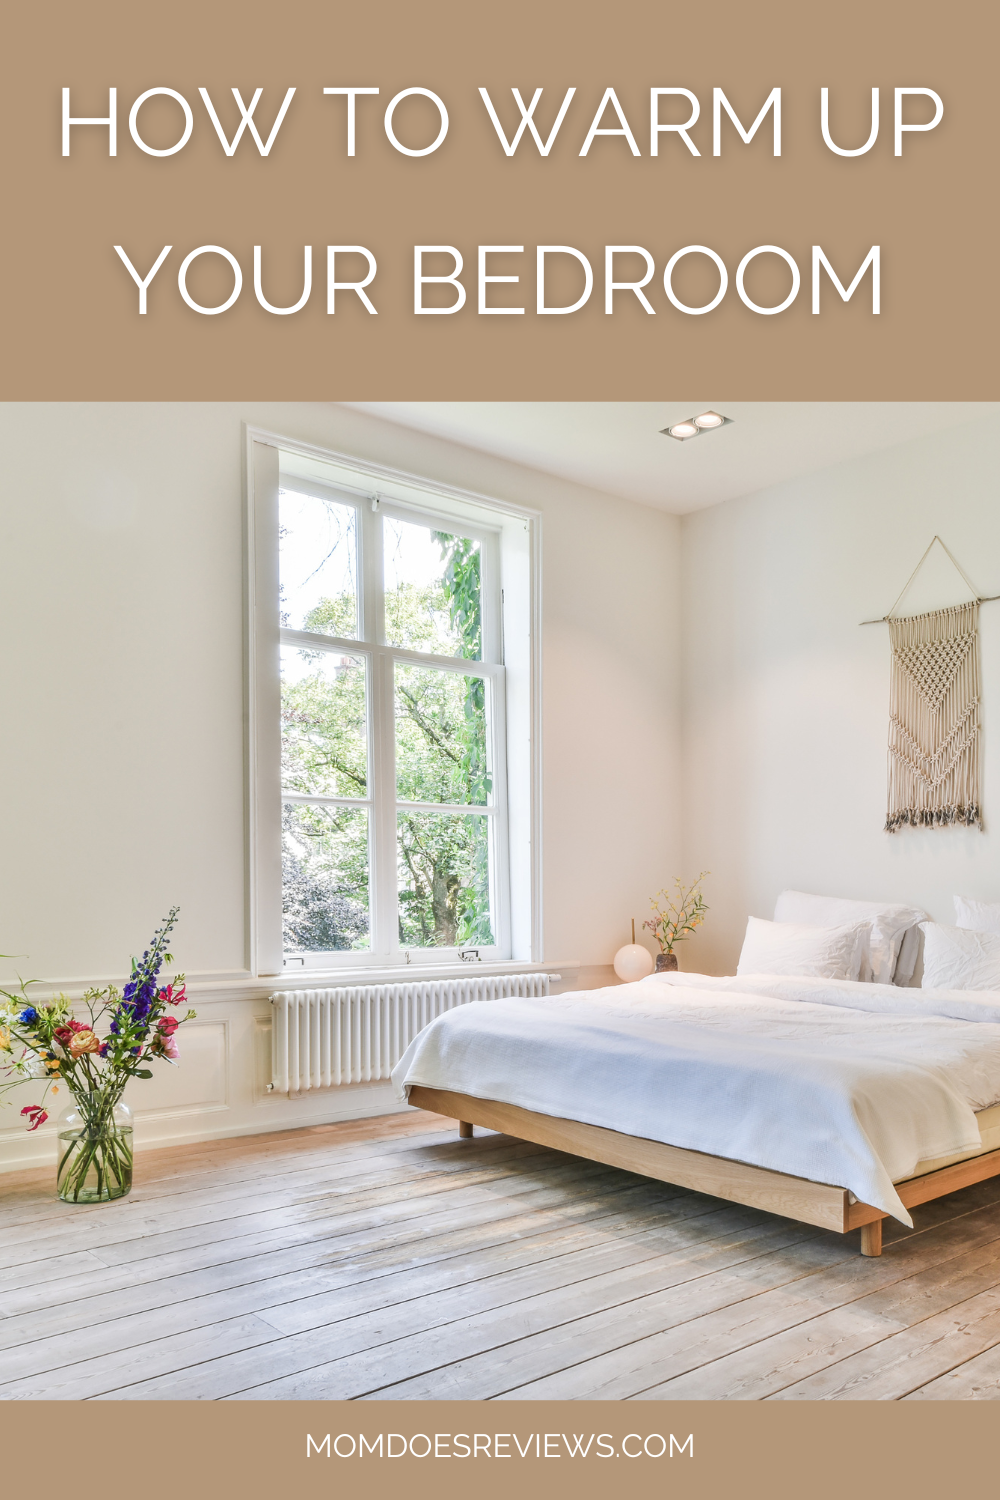 How To Warm Up Your Bedroom